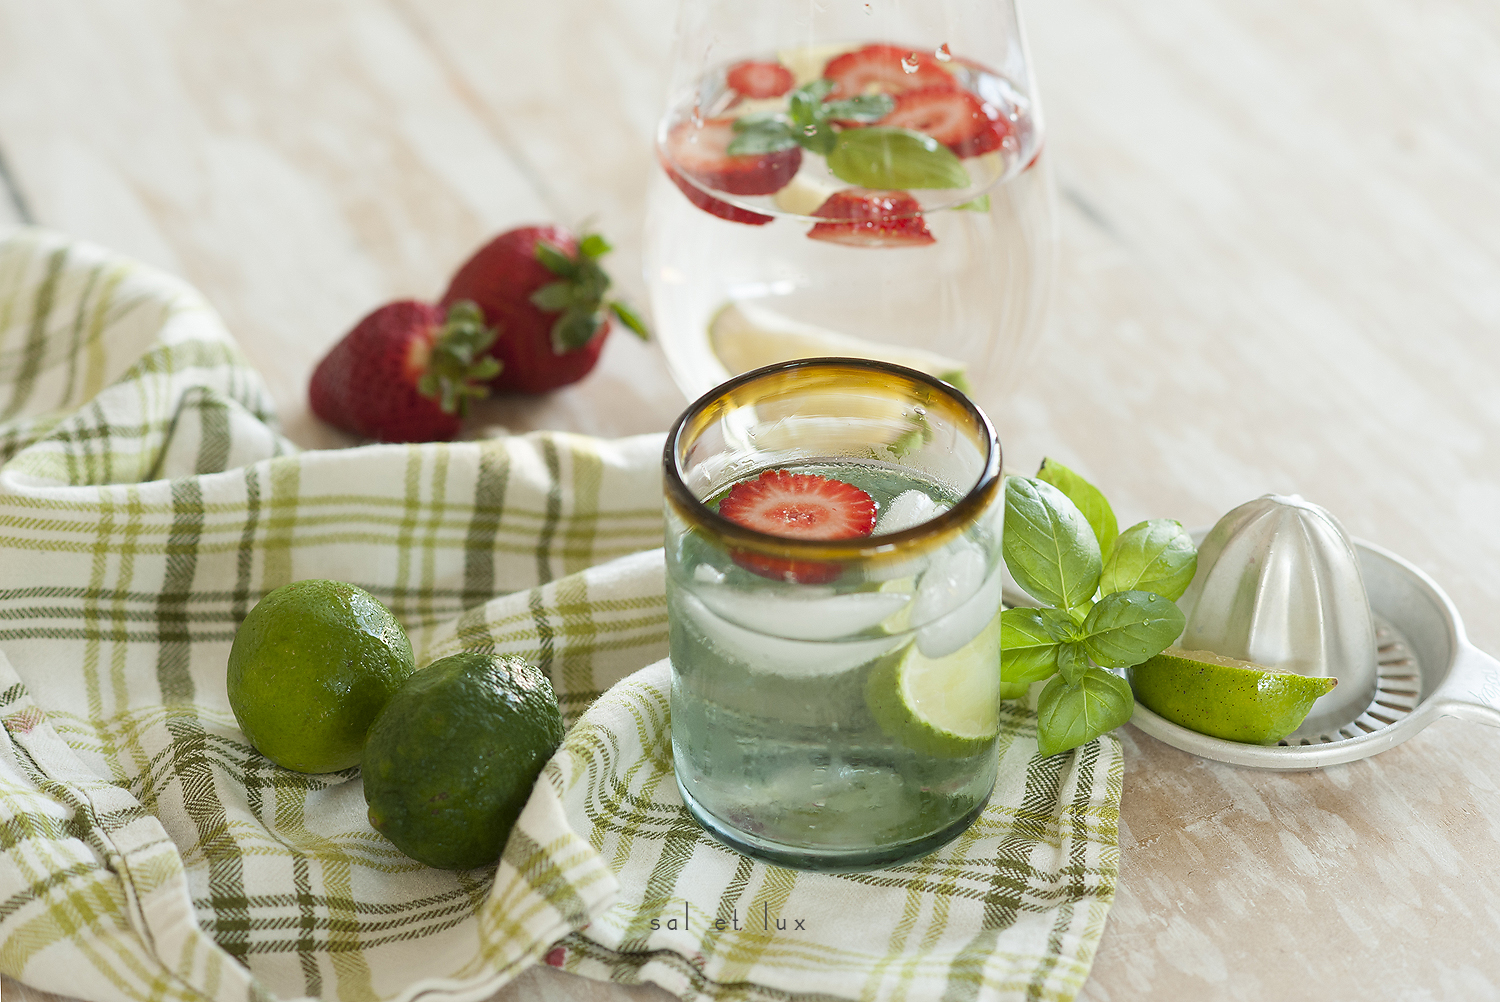 infused-water-recipe-sal-et-lux